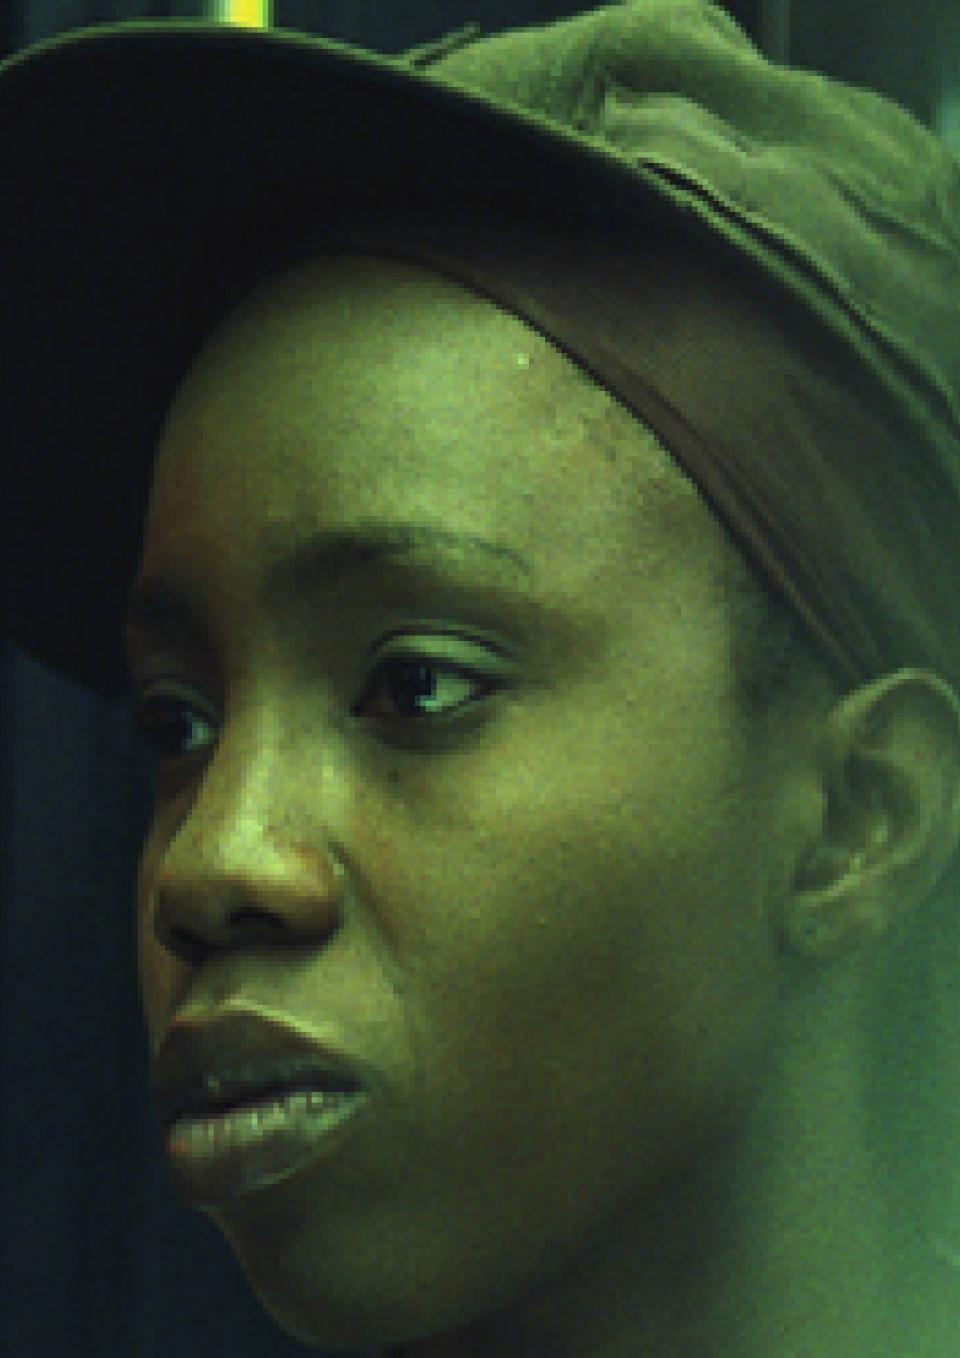 A close up image of a Black youth sitting in a bus with their face reflected on the bus window as they peer out into the distance. A harsh white street light obscures their reflection against the dark night background.